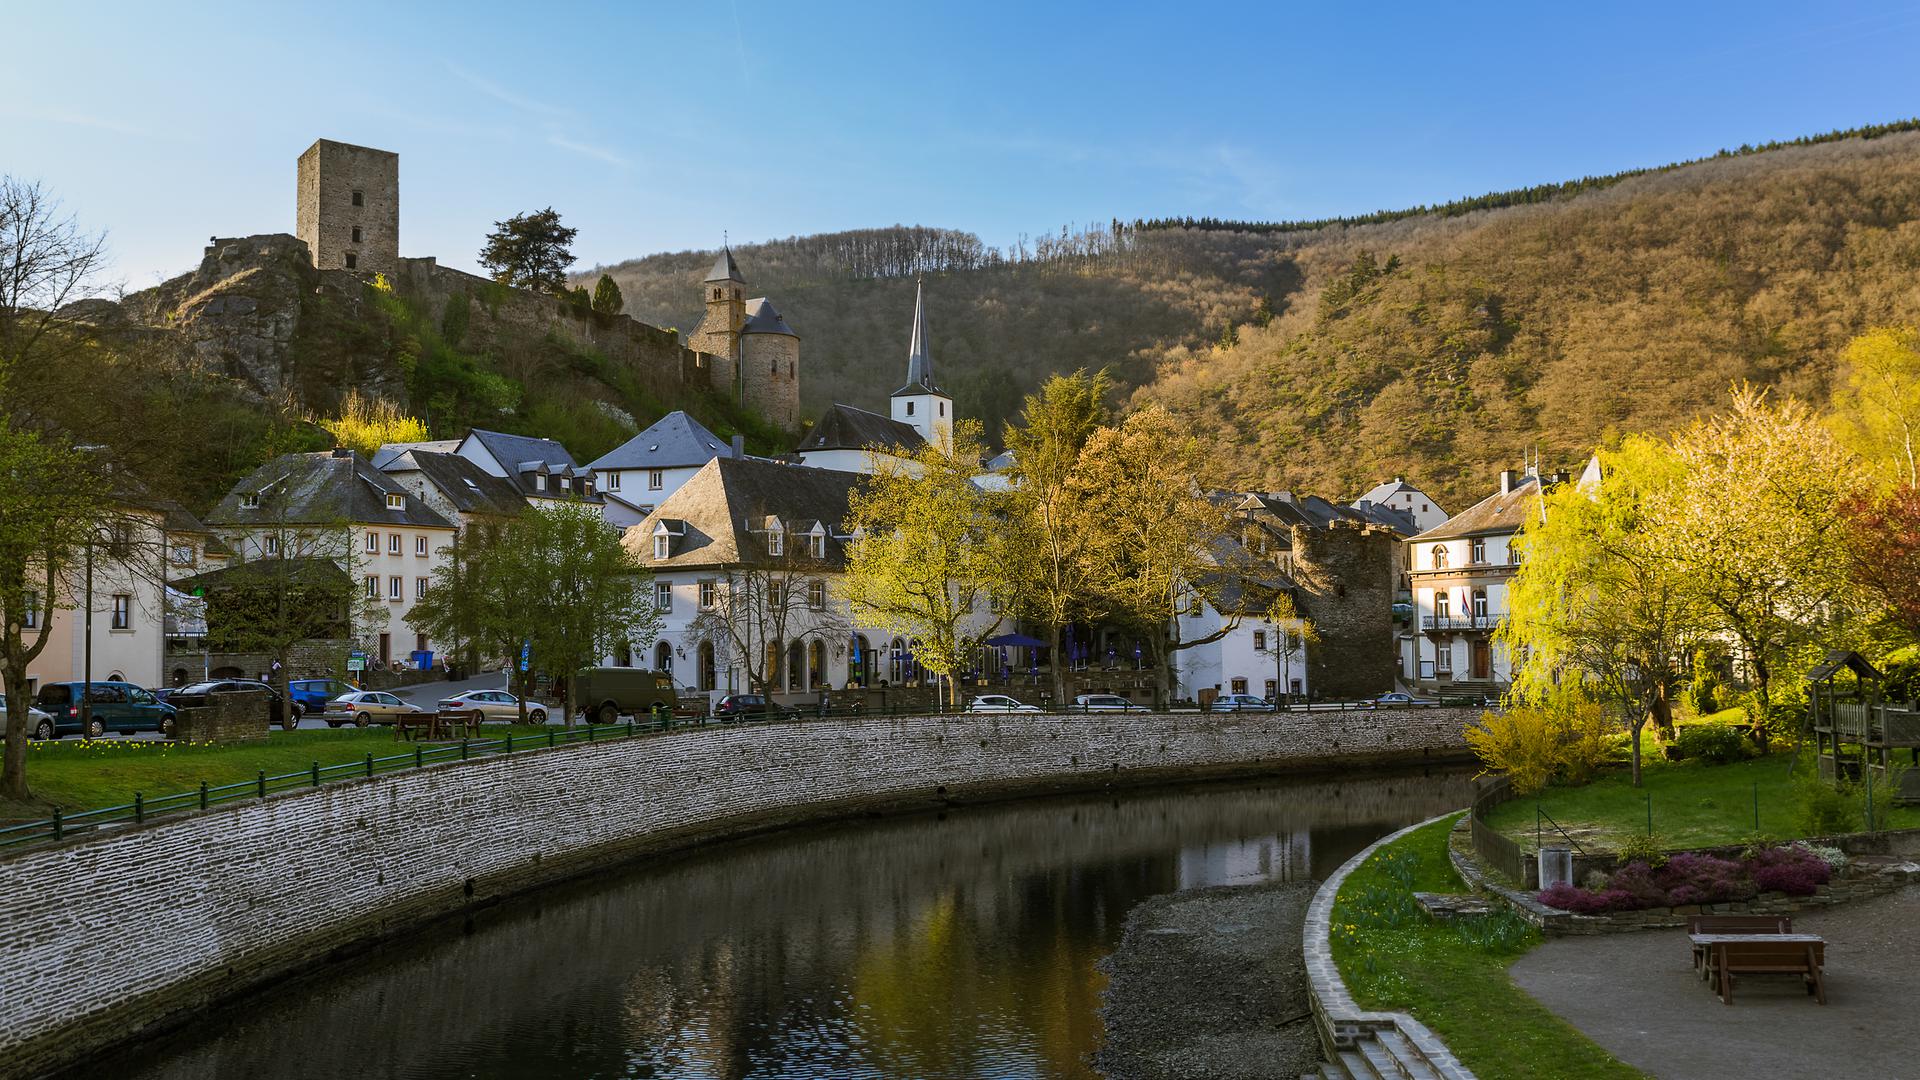 Esch-sur-Sûre and its neighbouring villages have plenty to offer the day tripper, from lakeside beaches and watersports to themed forest trails